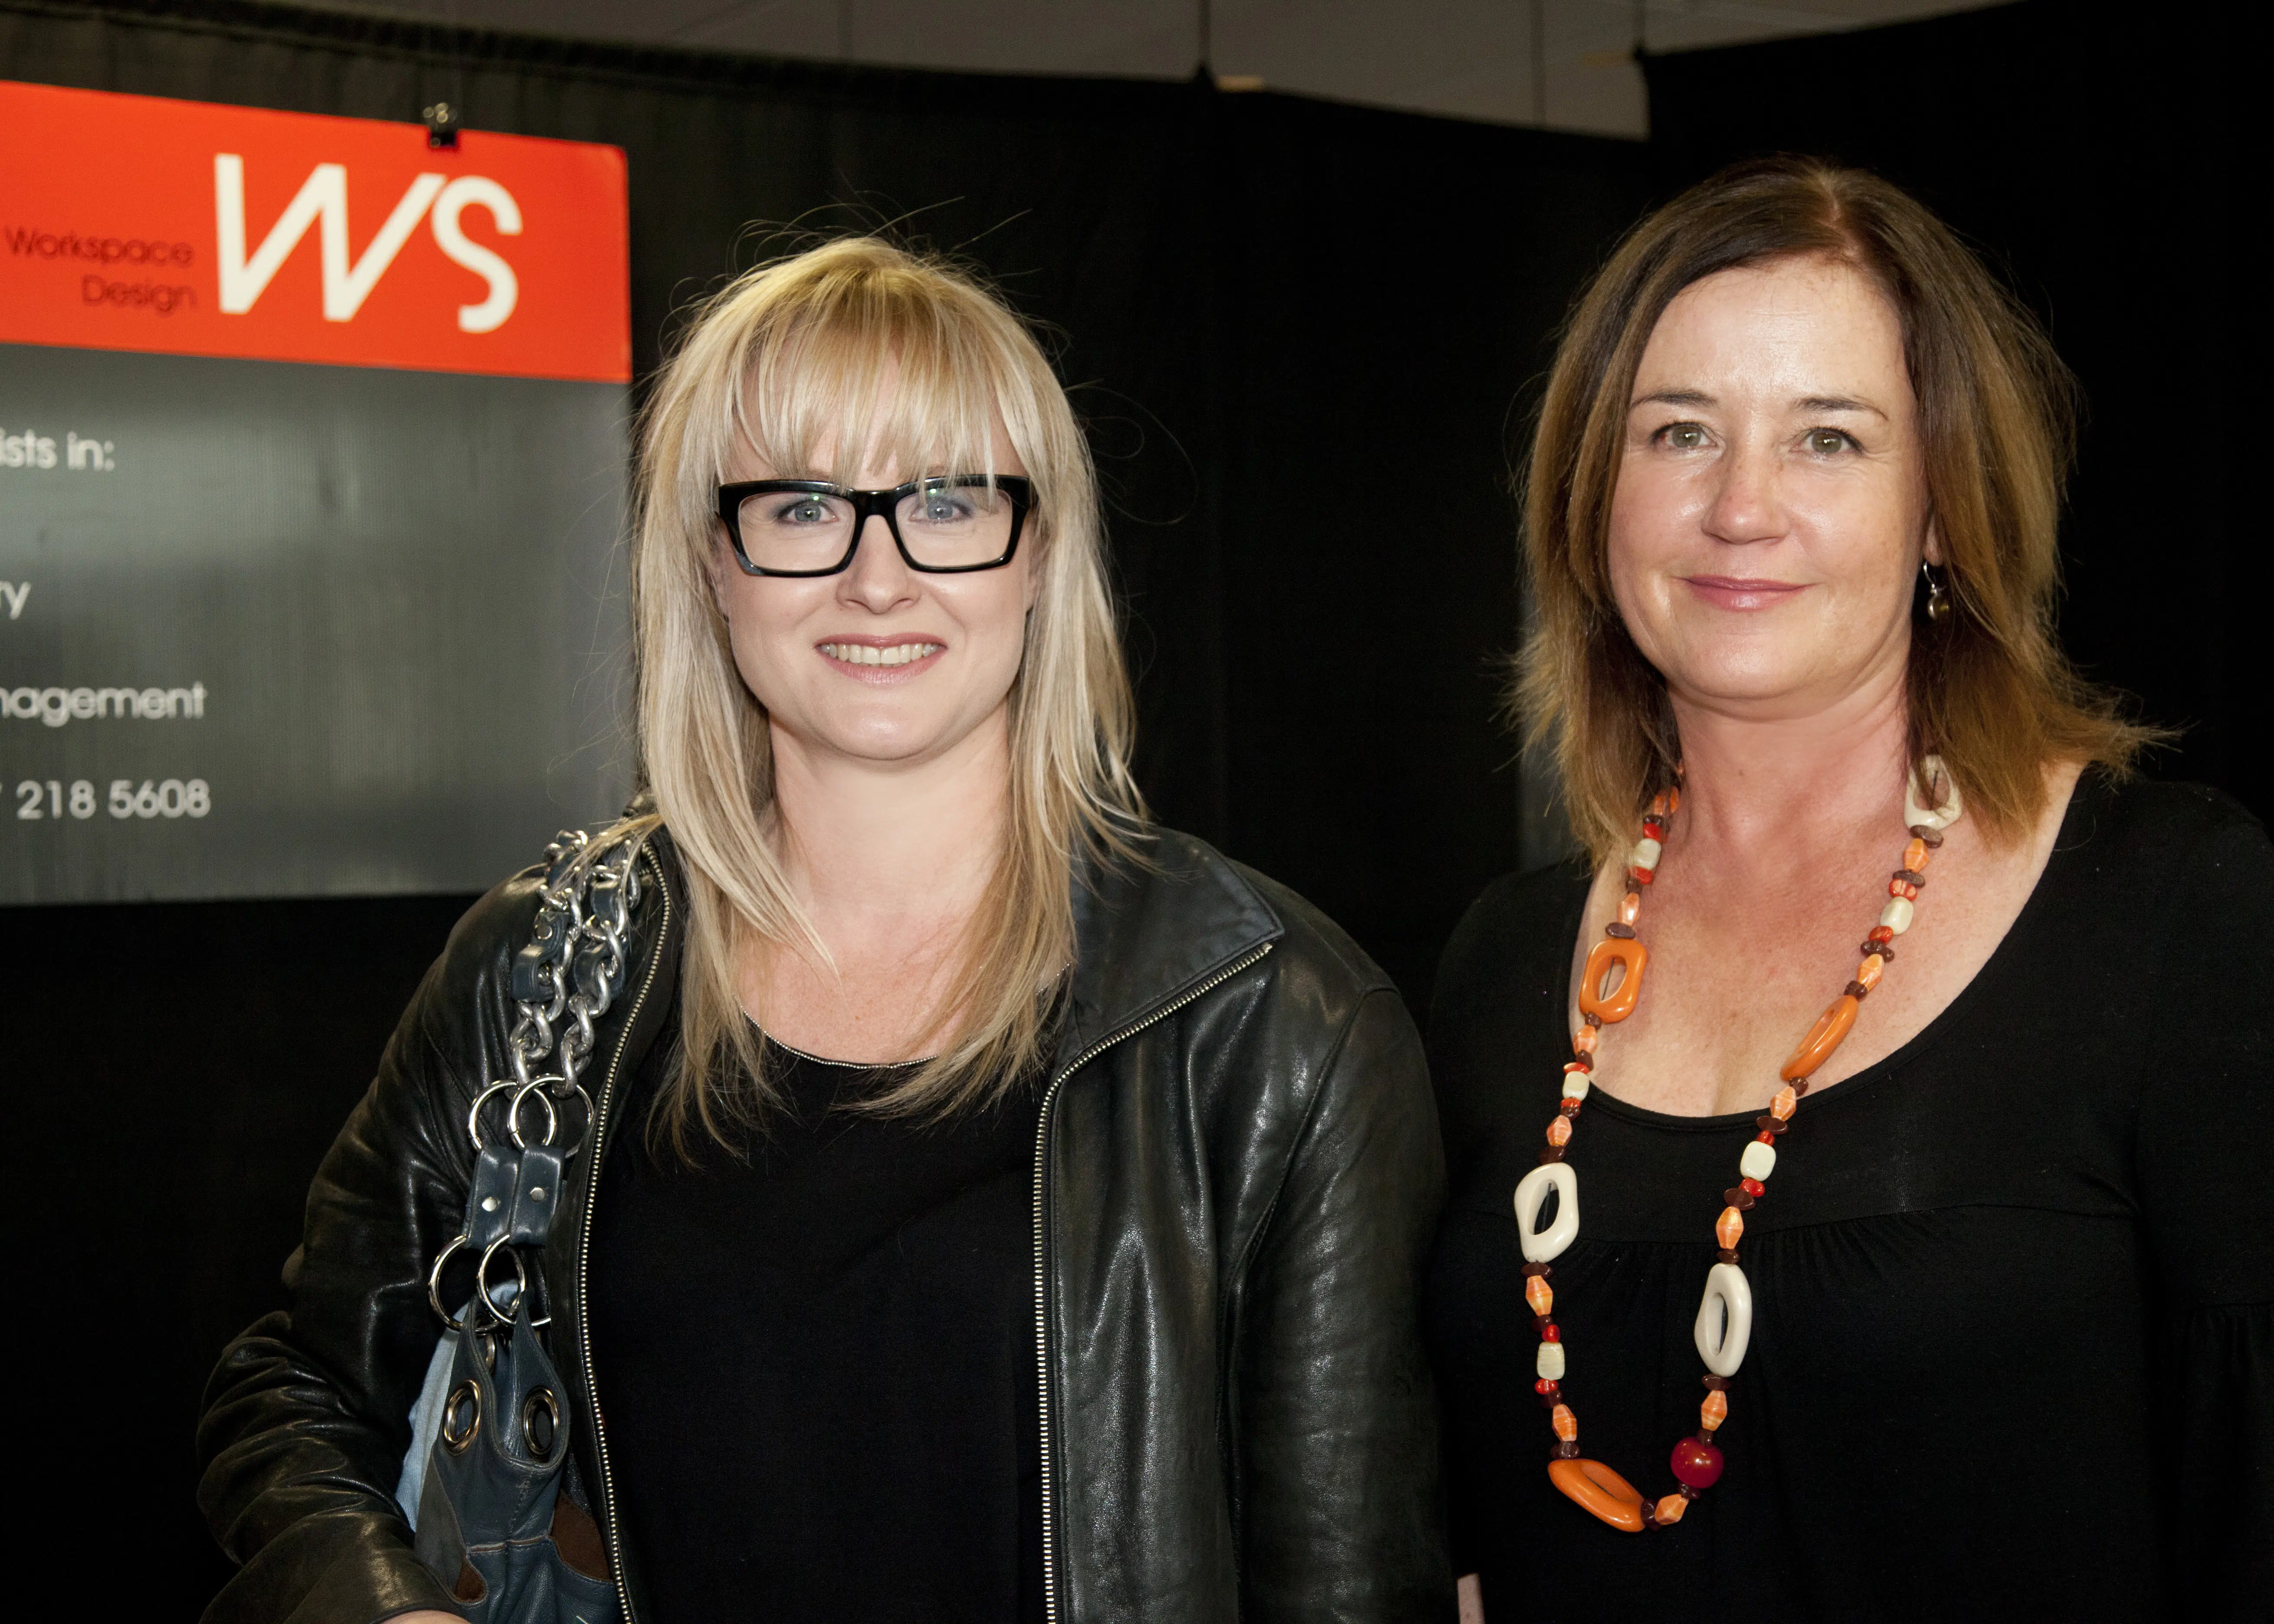 Steph Cawte of Poppetoptics and Liz Kirby of Flutter Design at the Venus Network expo, Takapuna, Auckland